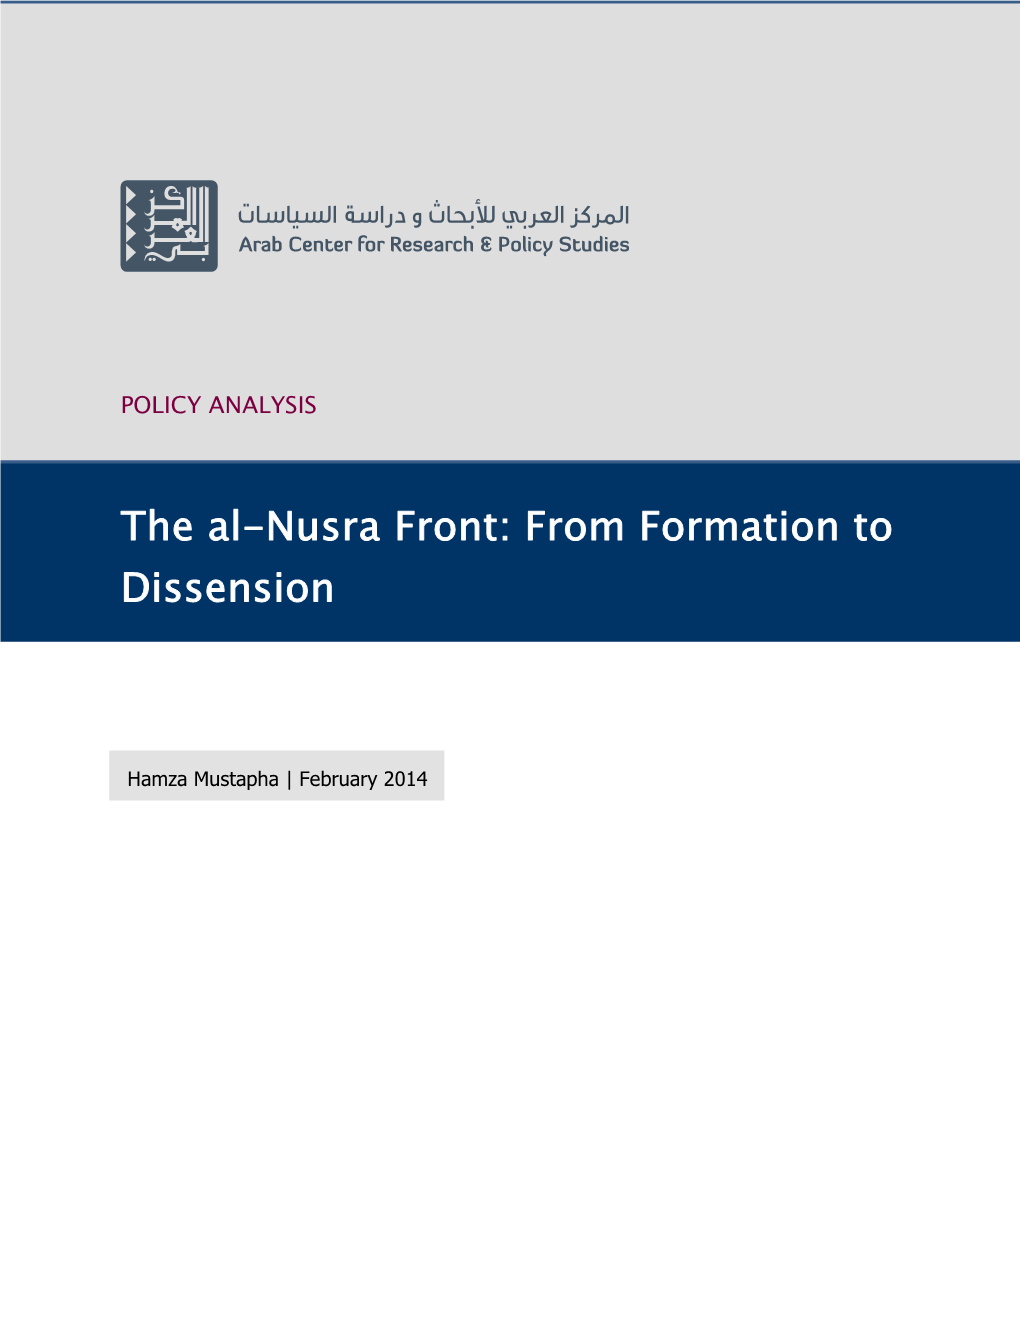 The Al-Nusra Front: from Formation to Dissension